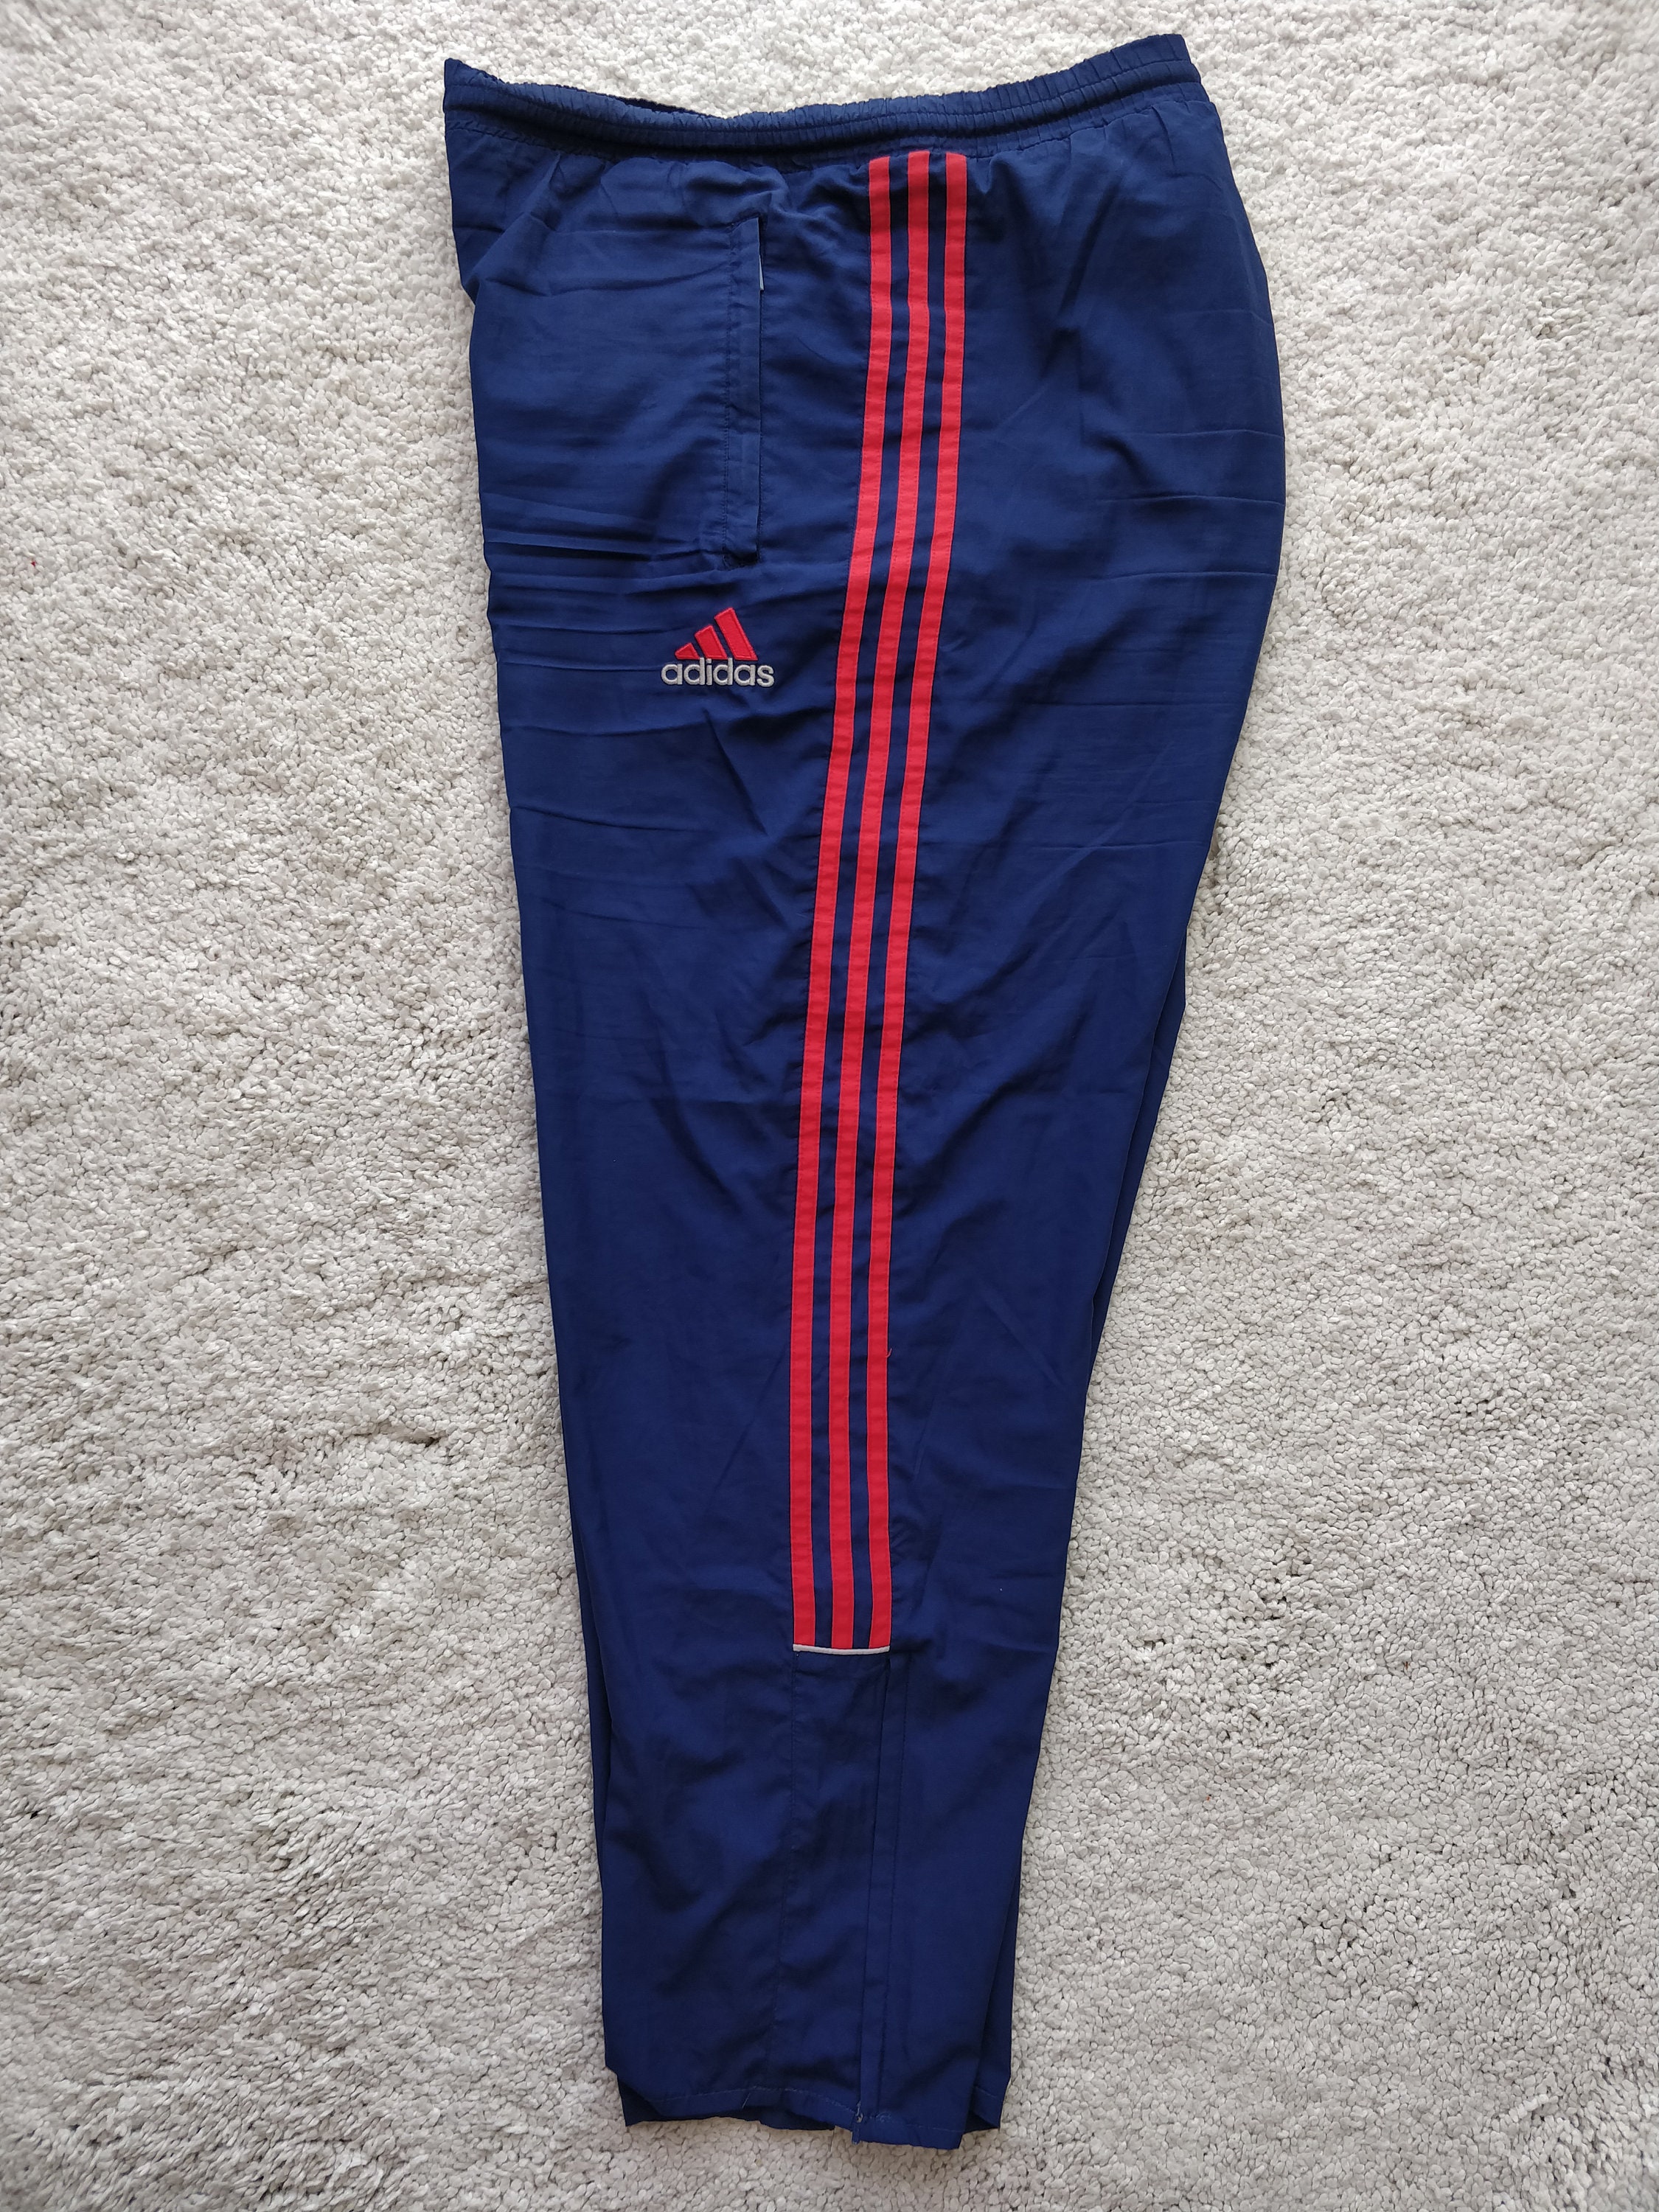 Adidas Blue Version Chino Track Pant Trouser Bottoms - H33467 - Various  Sizes | eBay